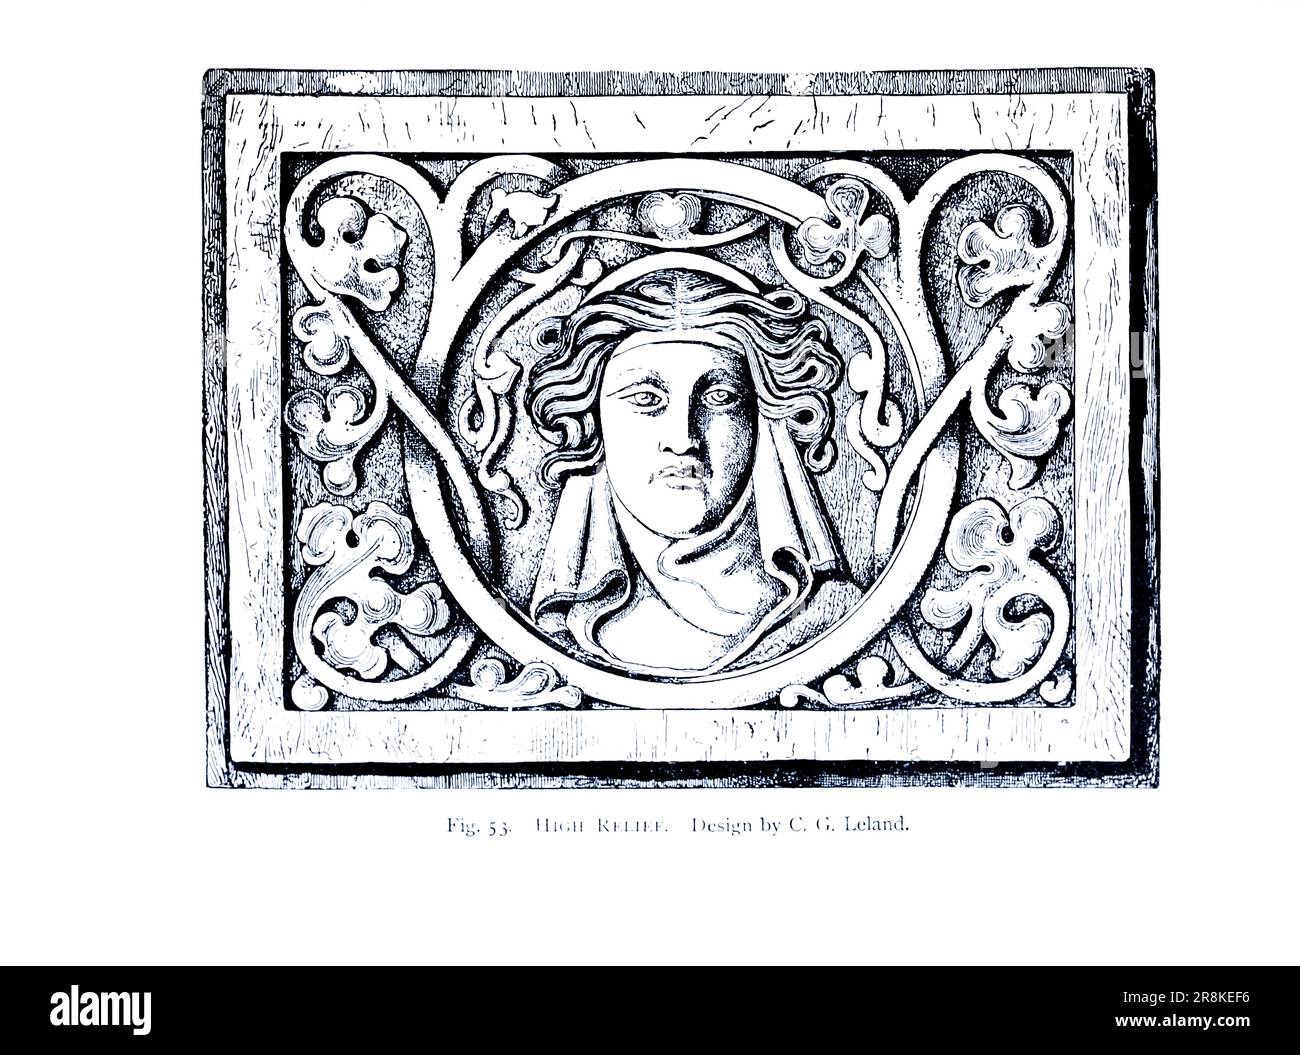 High Relief Design by C. G. Leland lineart sketch from the book ' A manual of wood carving ' by Leland, Charles Godfrey, 1824-1903; and Holtzapffel, John Jacob Publication date 1891 by New York, Scribner Stock Photo